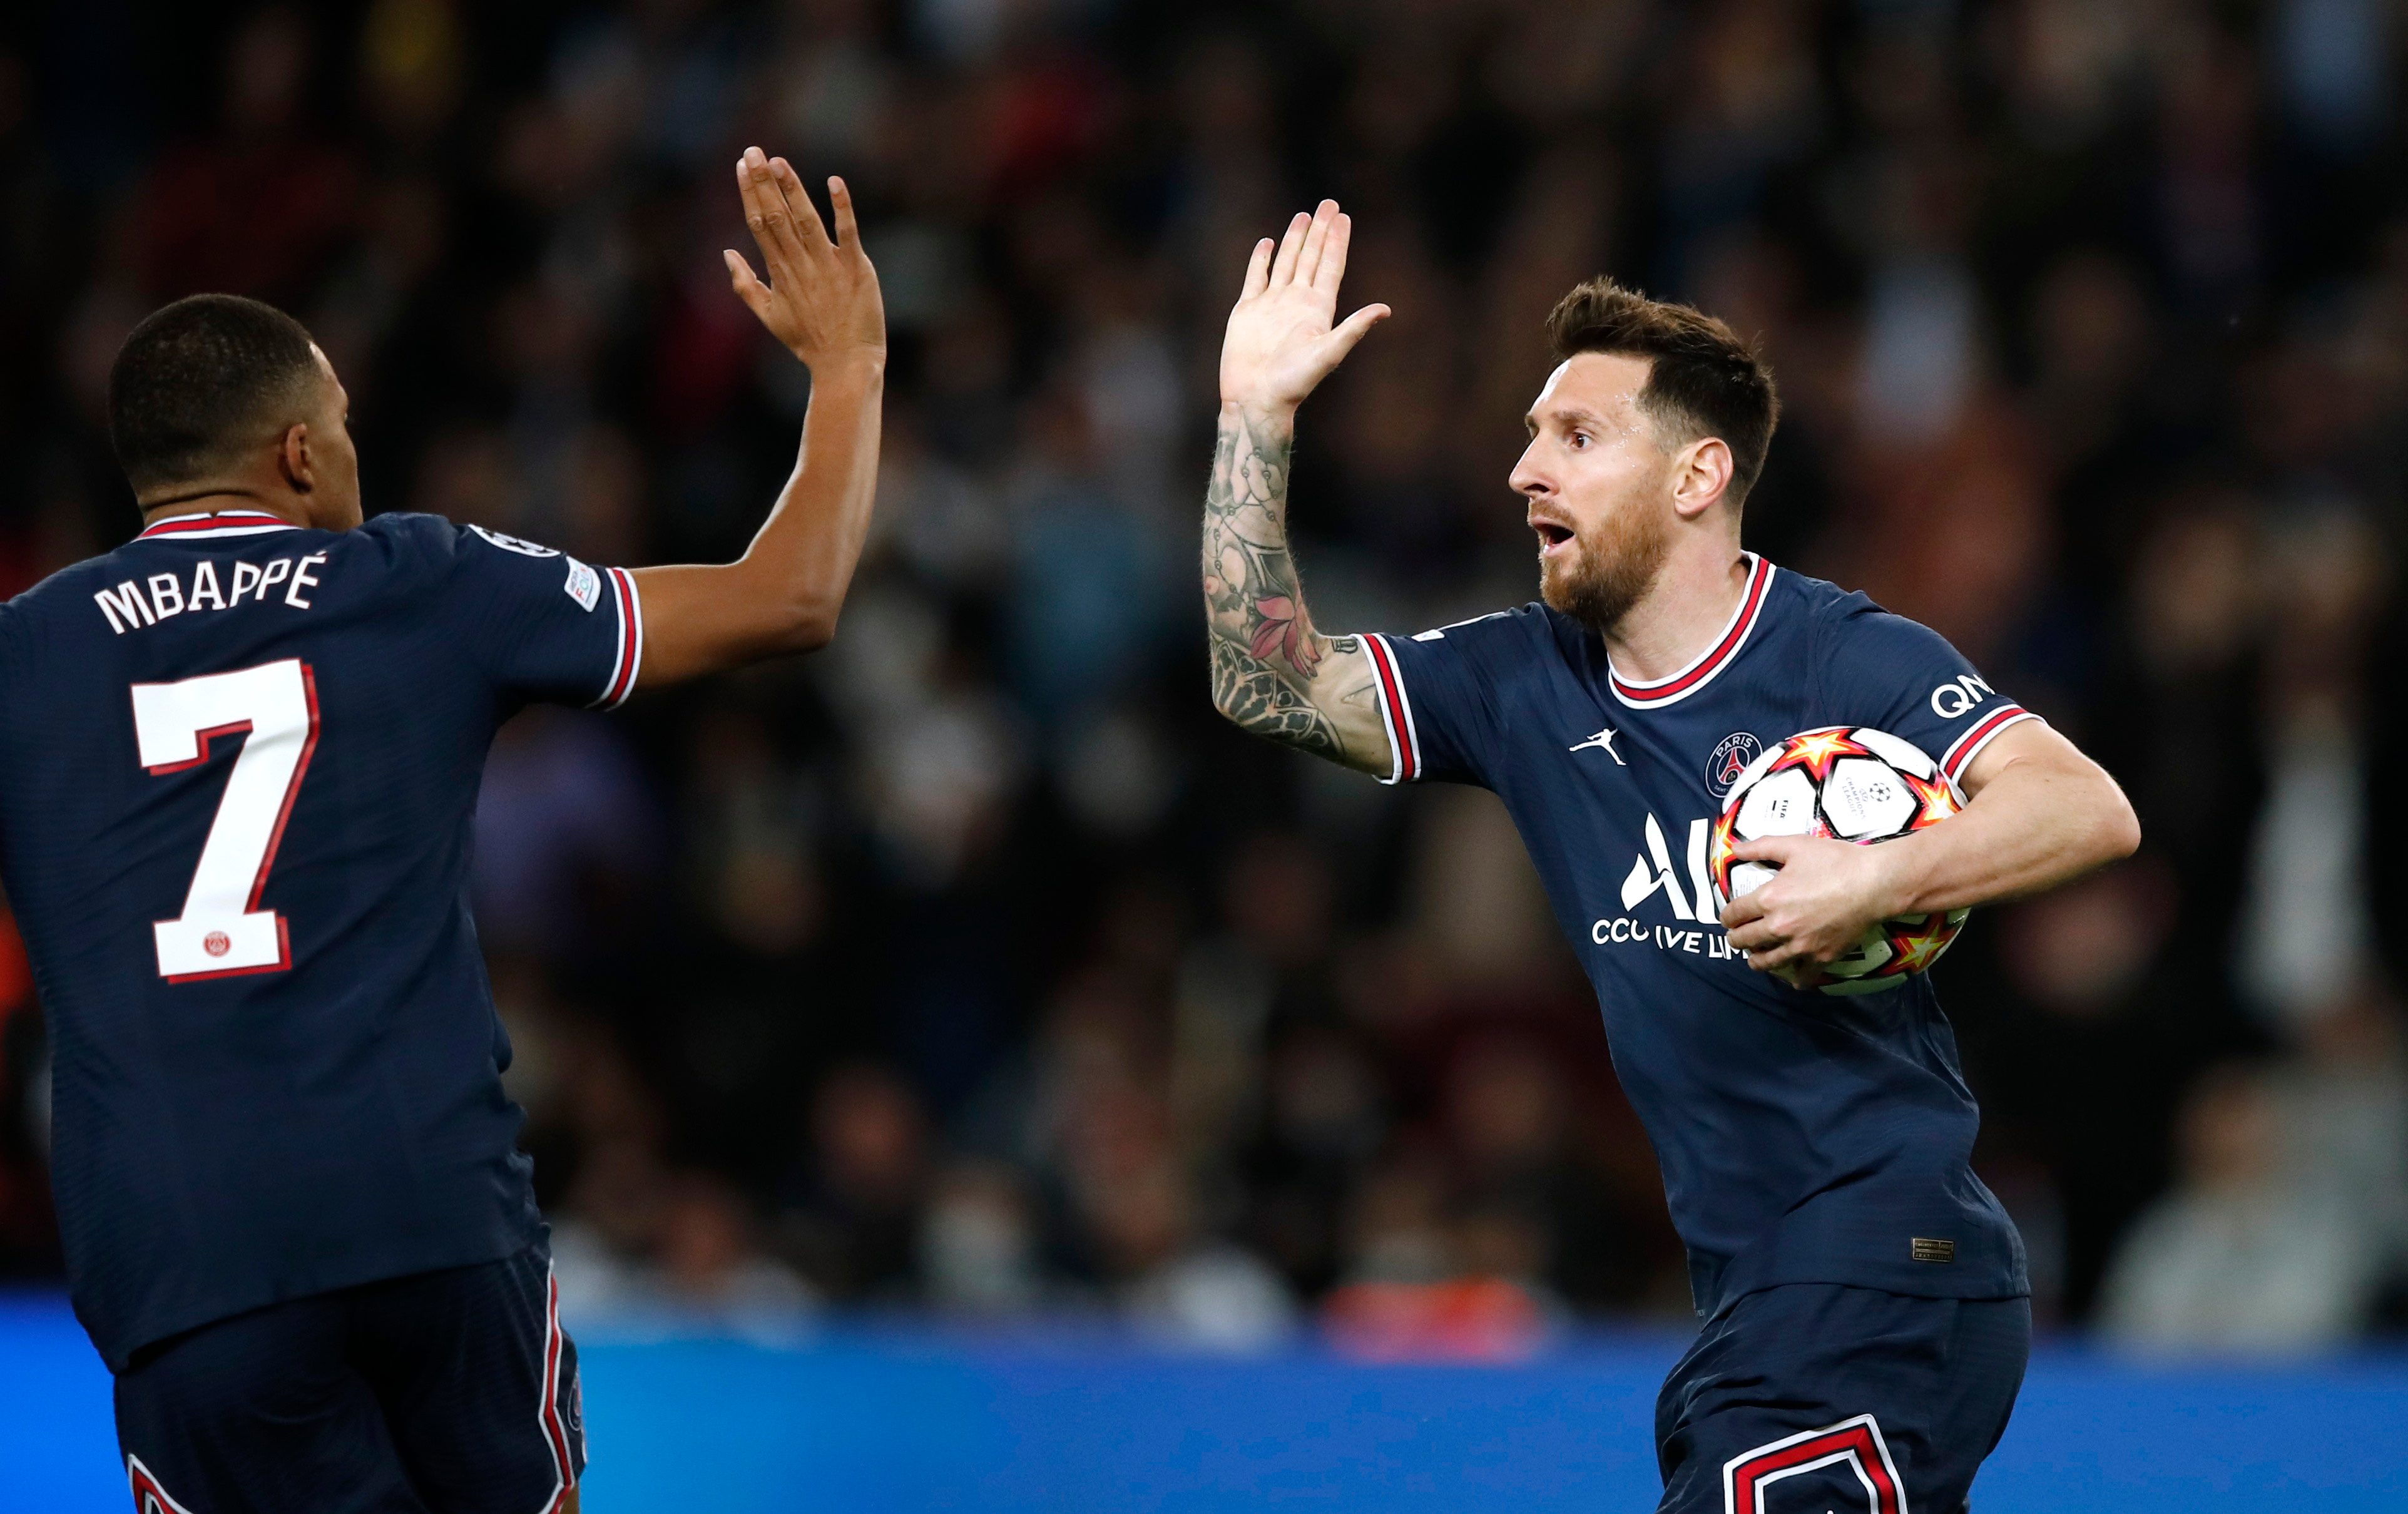 Messi finding his feet at PSG thanks to Mbappe